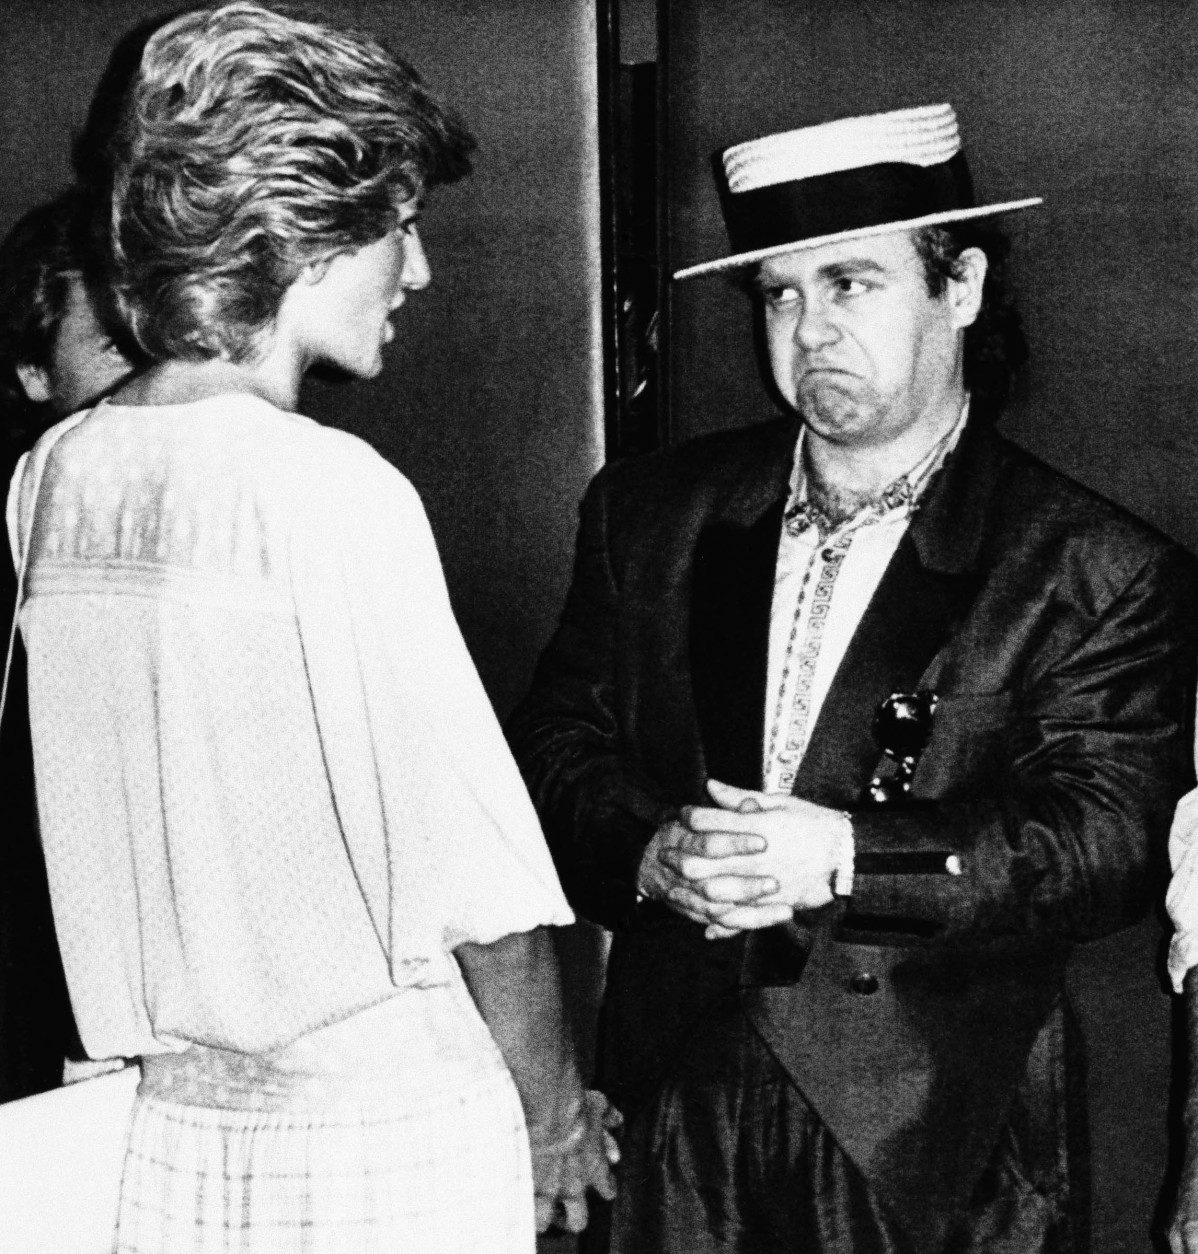 Britains Diana, Princess of Wales, left, meets rock star Elton John on her arrival at Wembley Stadium for the London end of the Live Aid famine relief concert for Africa, which was being relayed by TV to the world from there and Philadelphia, July 13, 1985, London, England. (AP Photo/Rota/Pool)